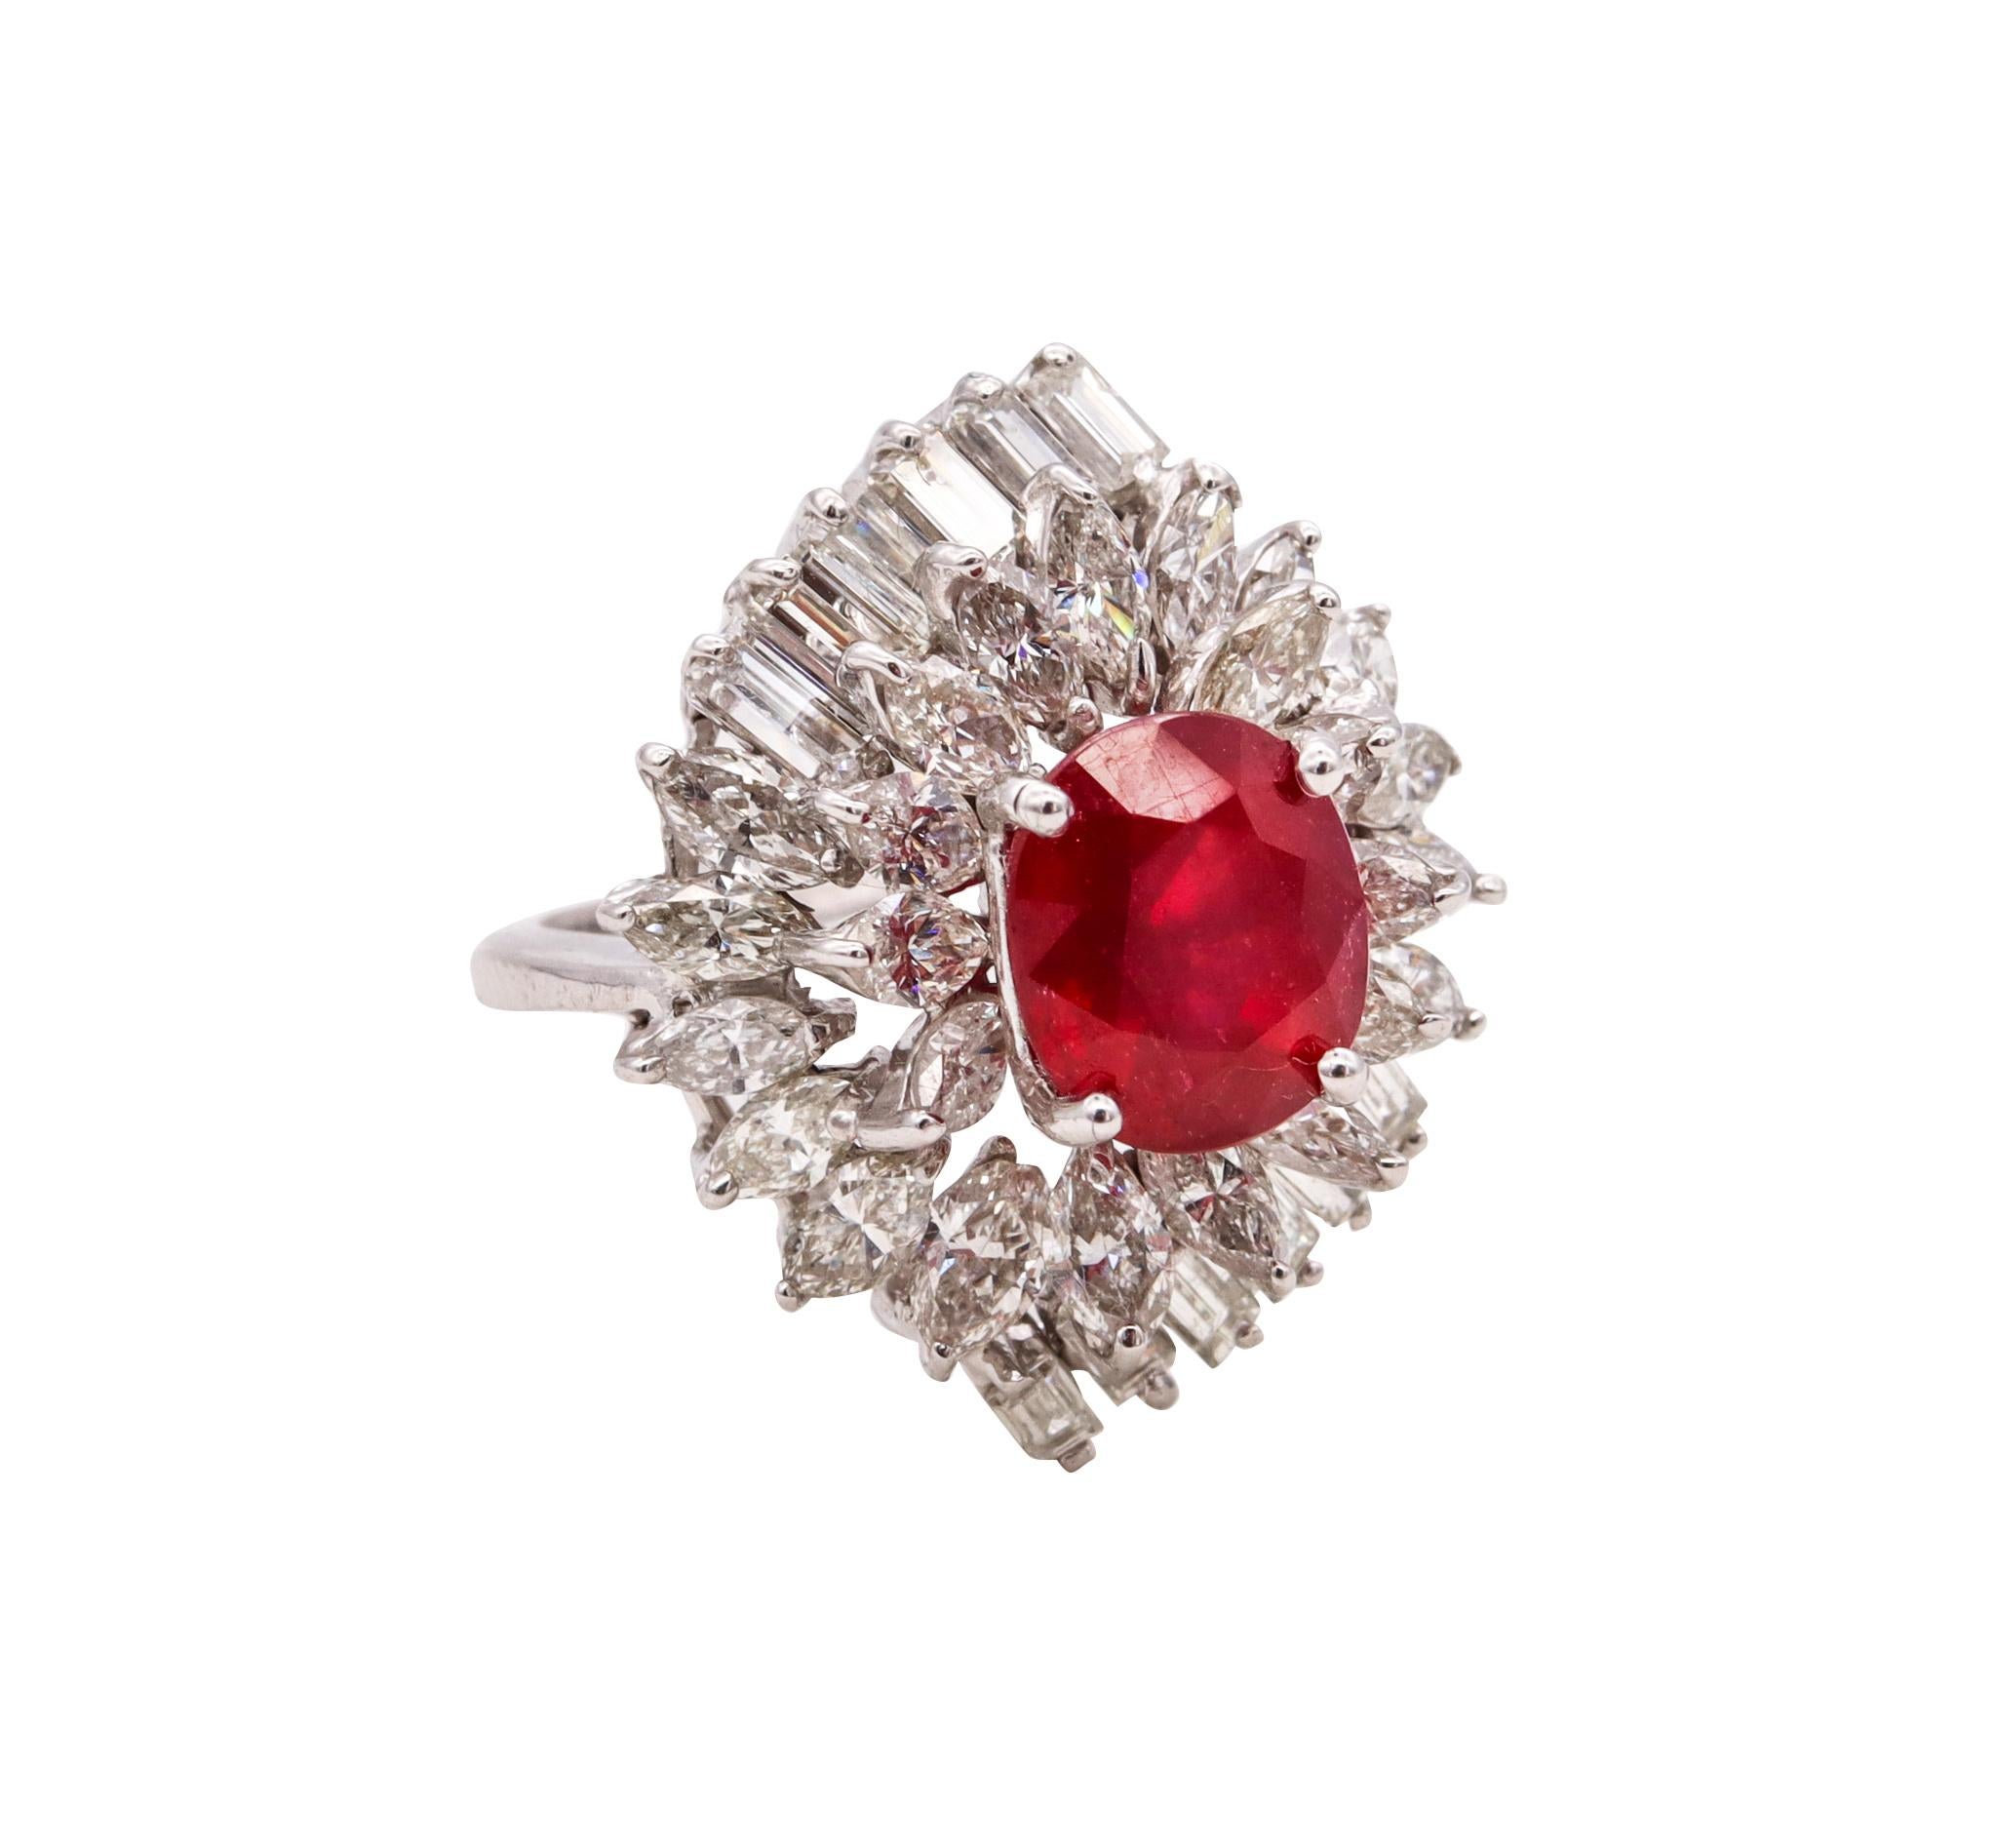 Jeweled cluster cocktail ring.

Very handsome piece created during the American mid-century period, circa 1960. This cocktail ring was crafted, with Hollywood regency patterns in solid white gold of 14 karats and is embellished with a cluster of